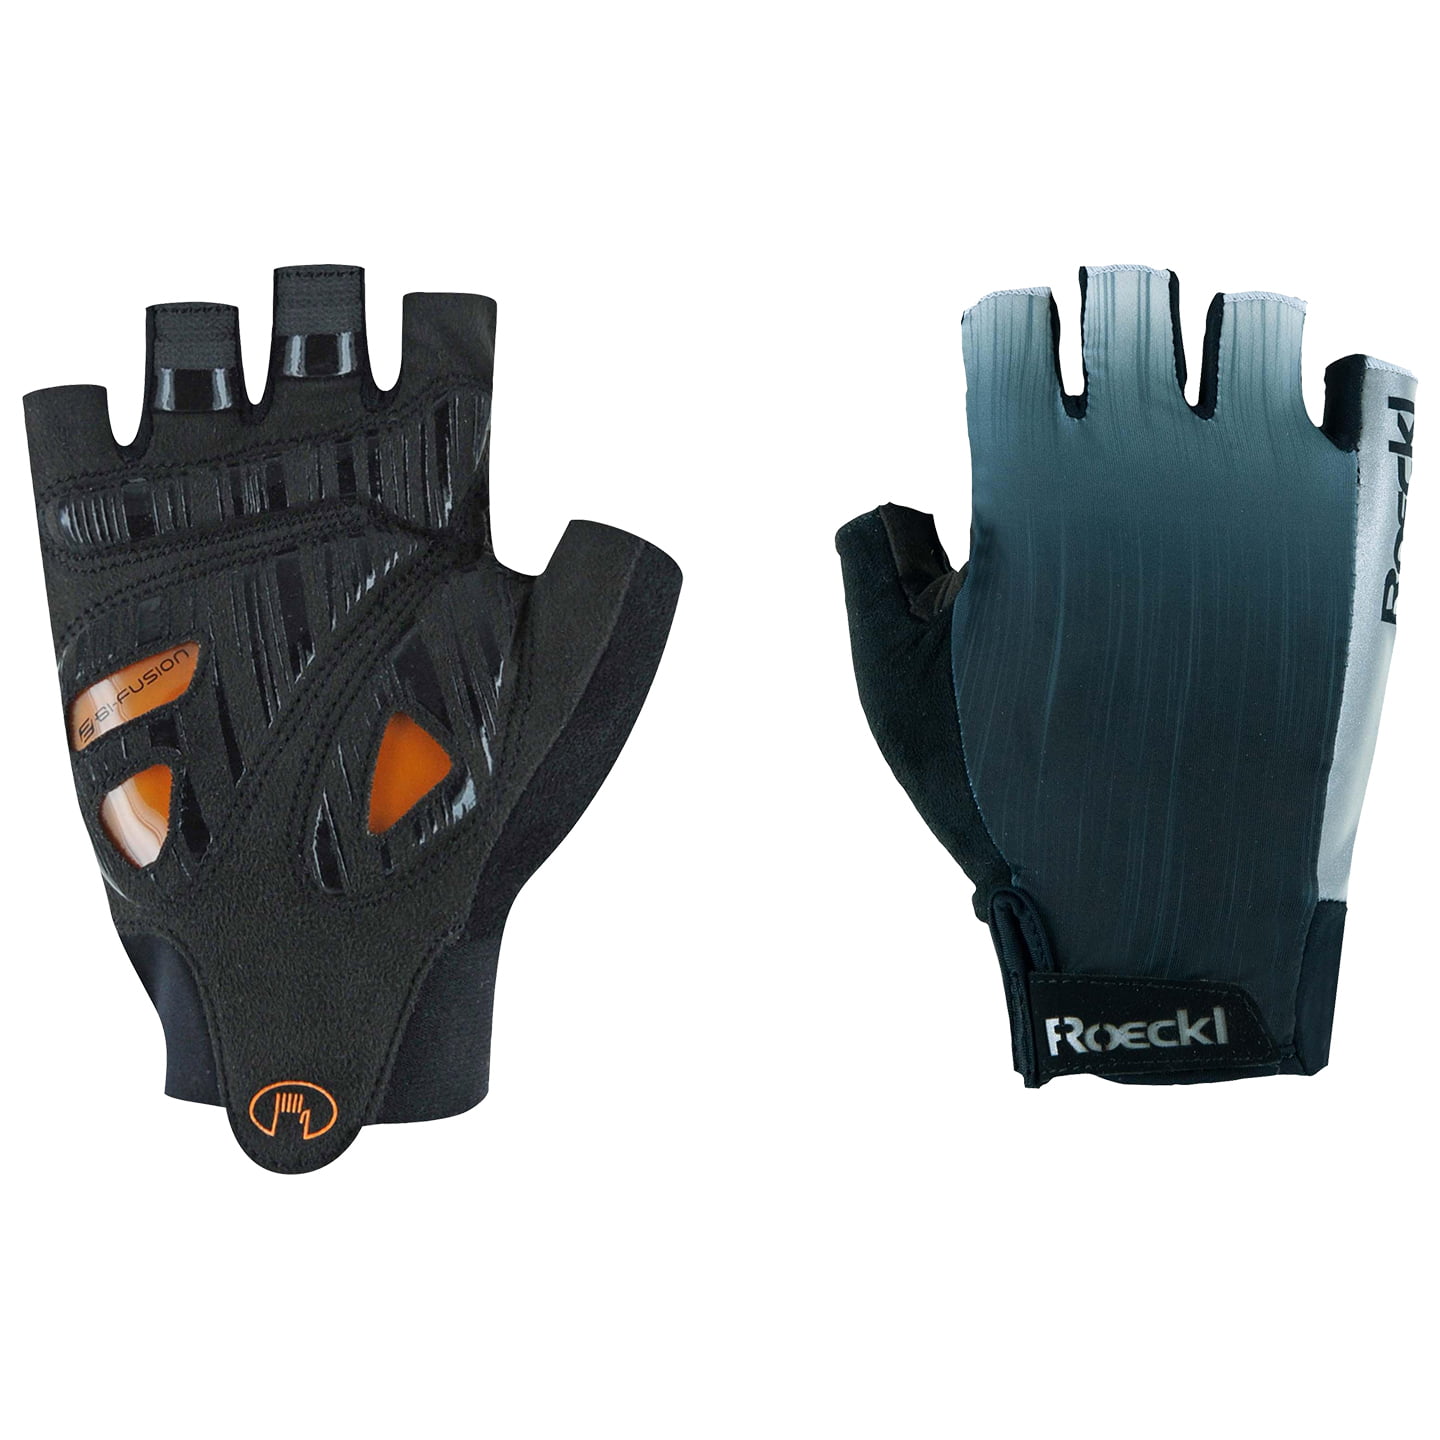 ROECKL Illasi MTB Gloves Cycling Gloves, for men, size 8, Cycle gloves, Cycle clothes